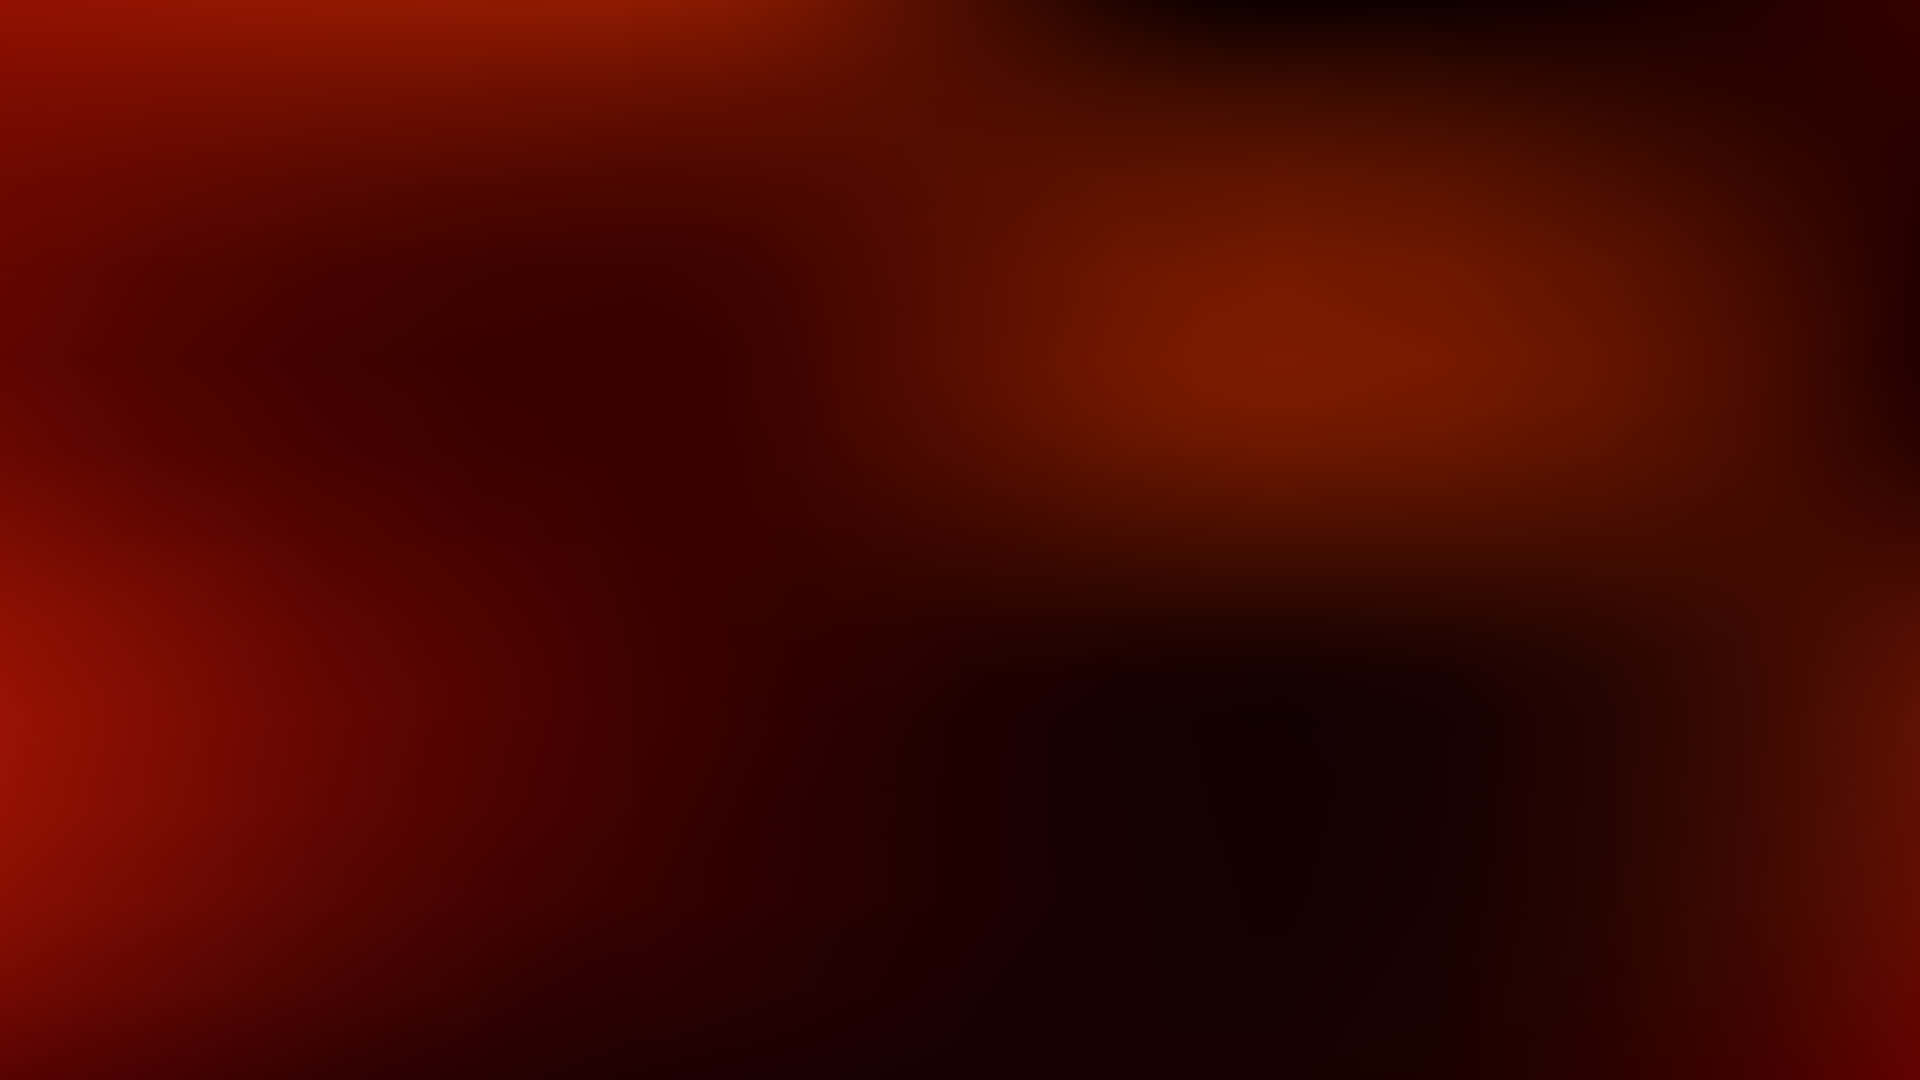 a red and black abstract background Wallpaper